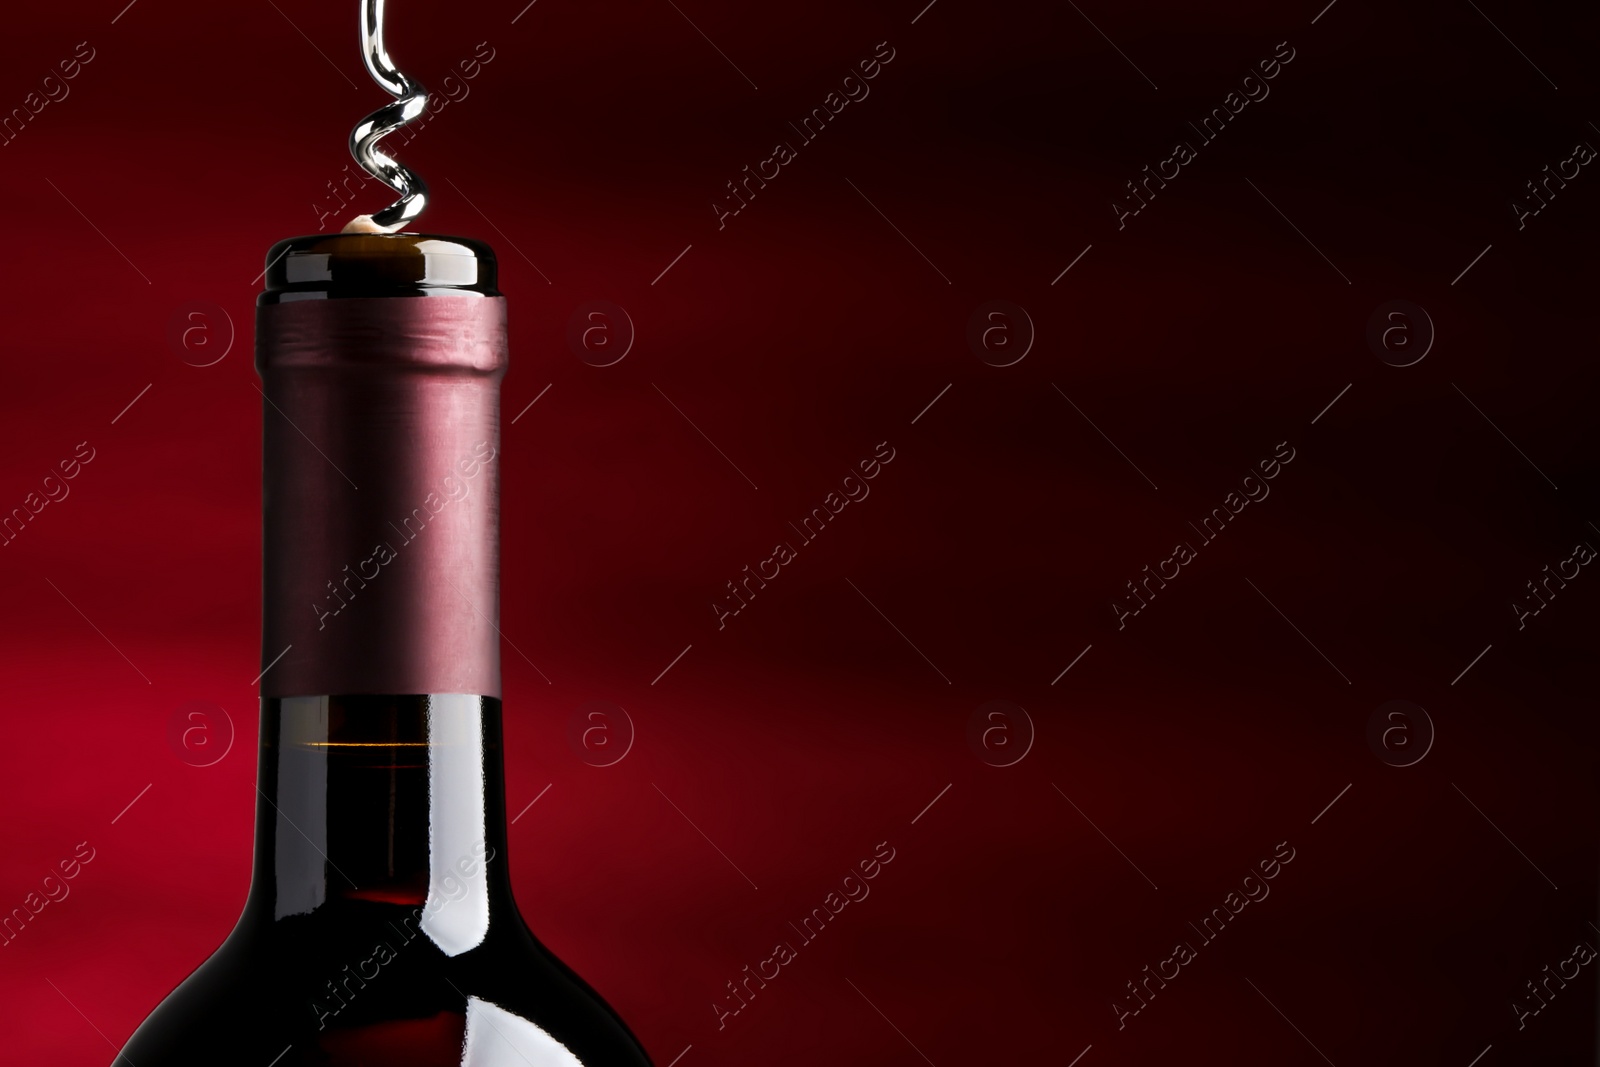 Photo of Opening bottle of wine with corkscrew on burgundy background. Space for text